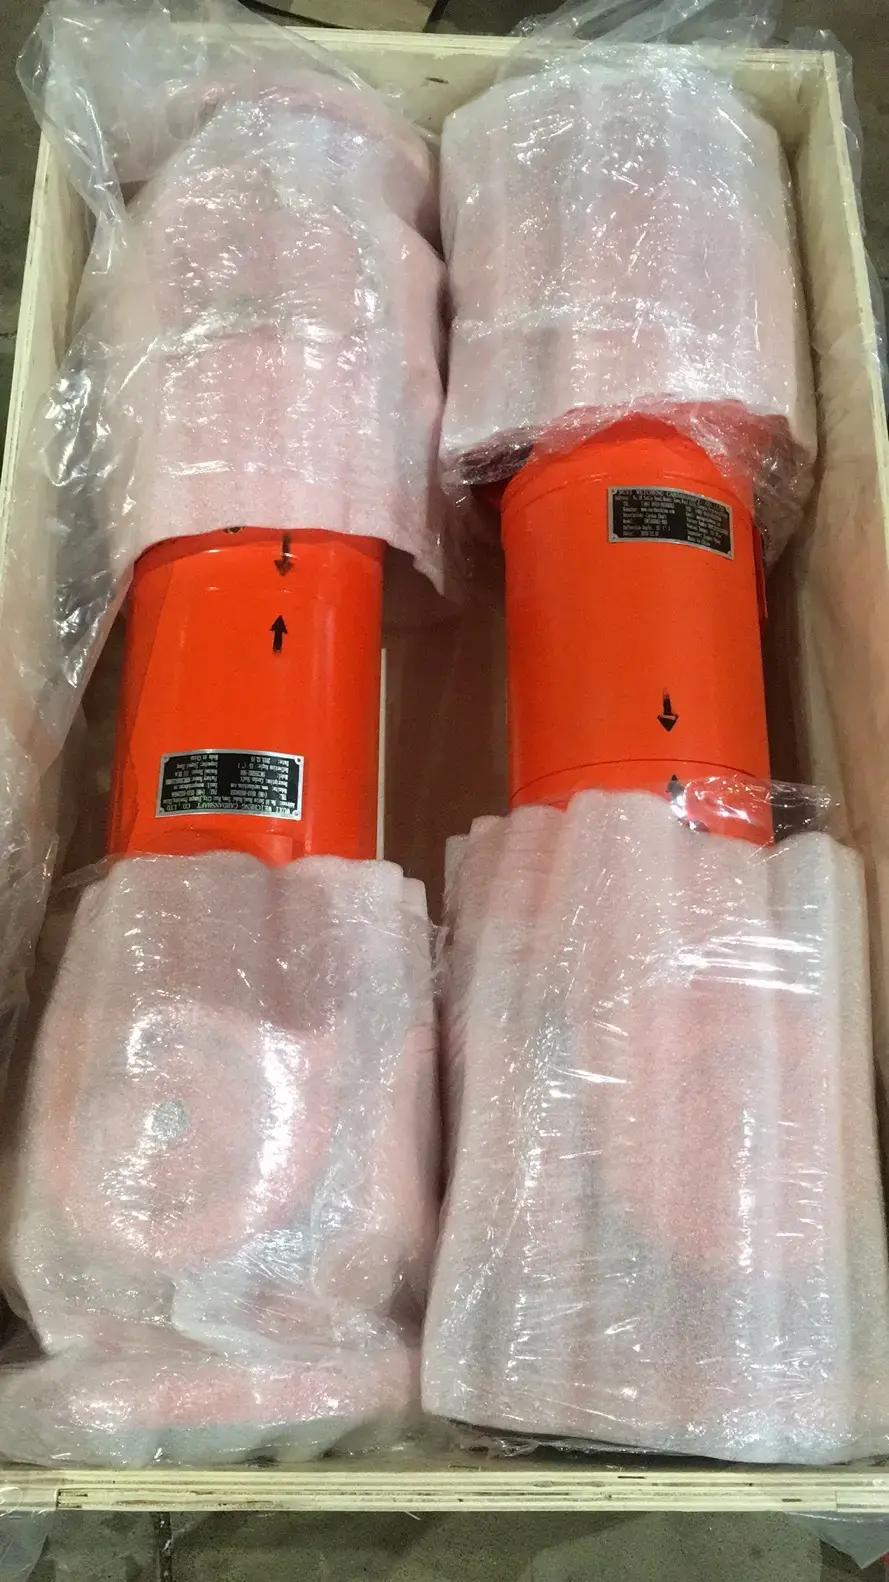 SWC285 cardan shaft ordered by Belarusian customer has been packed